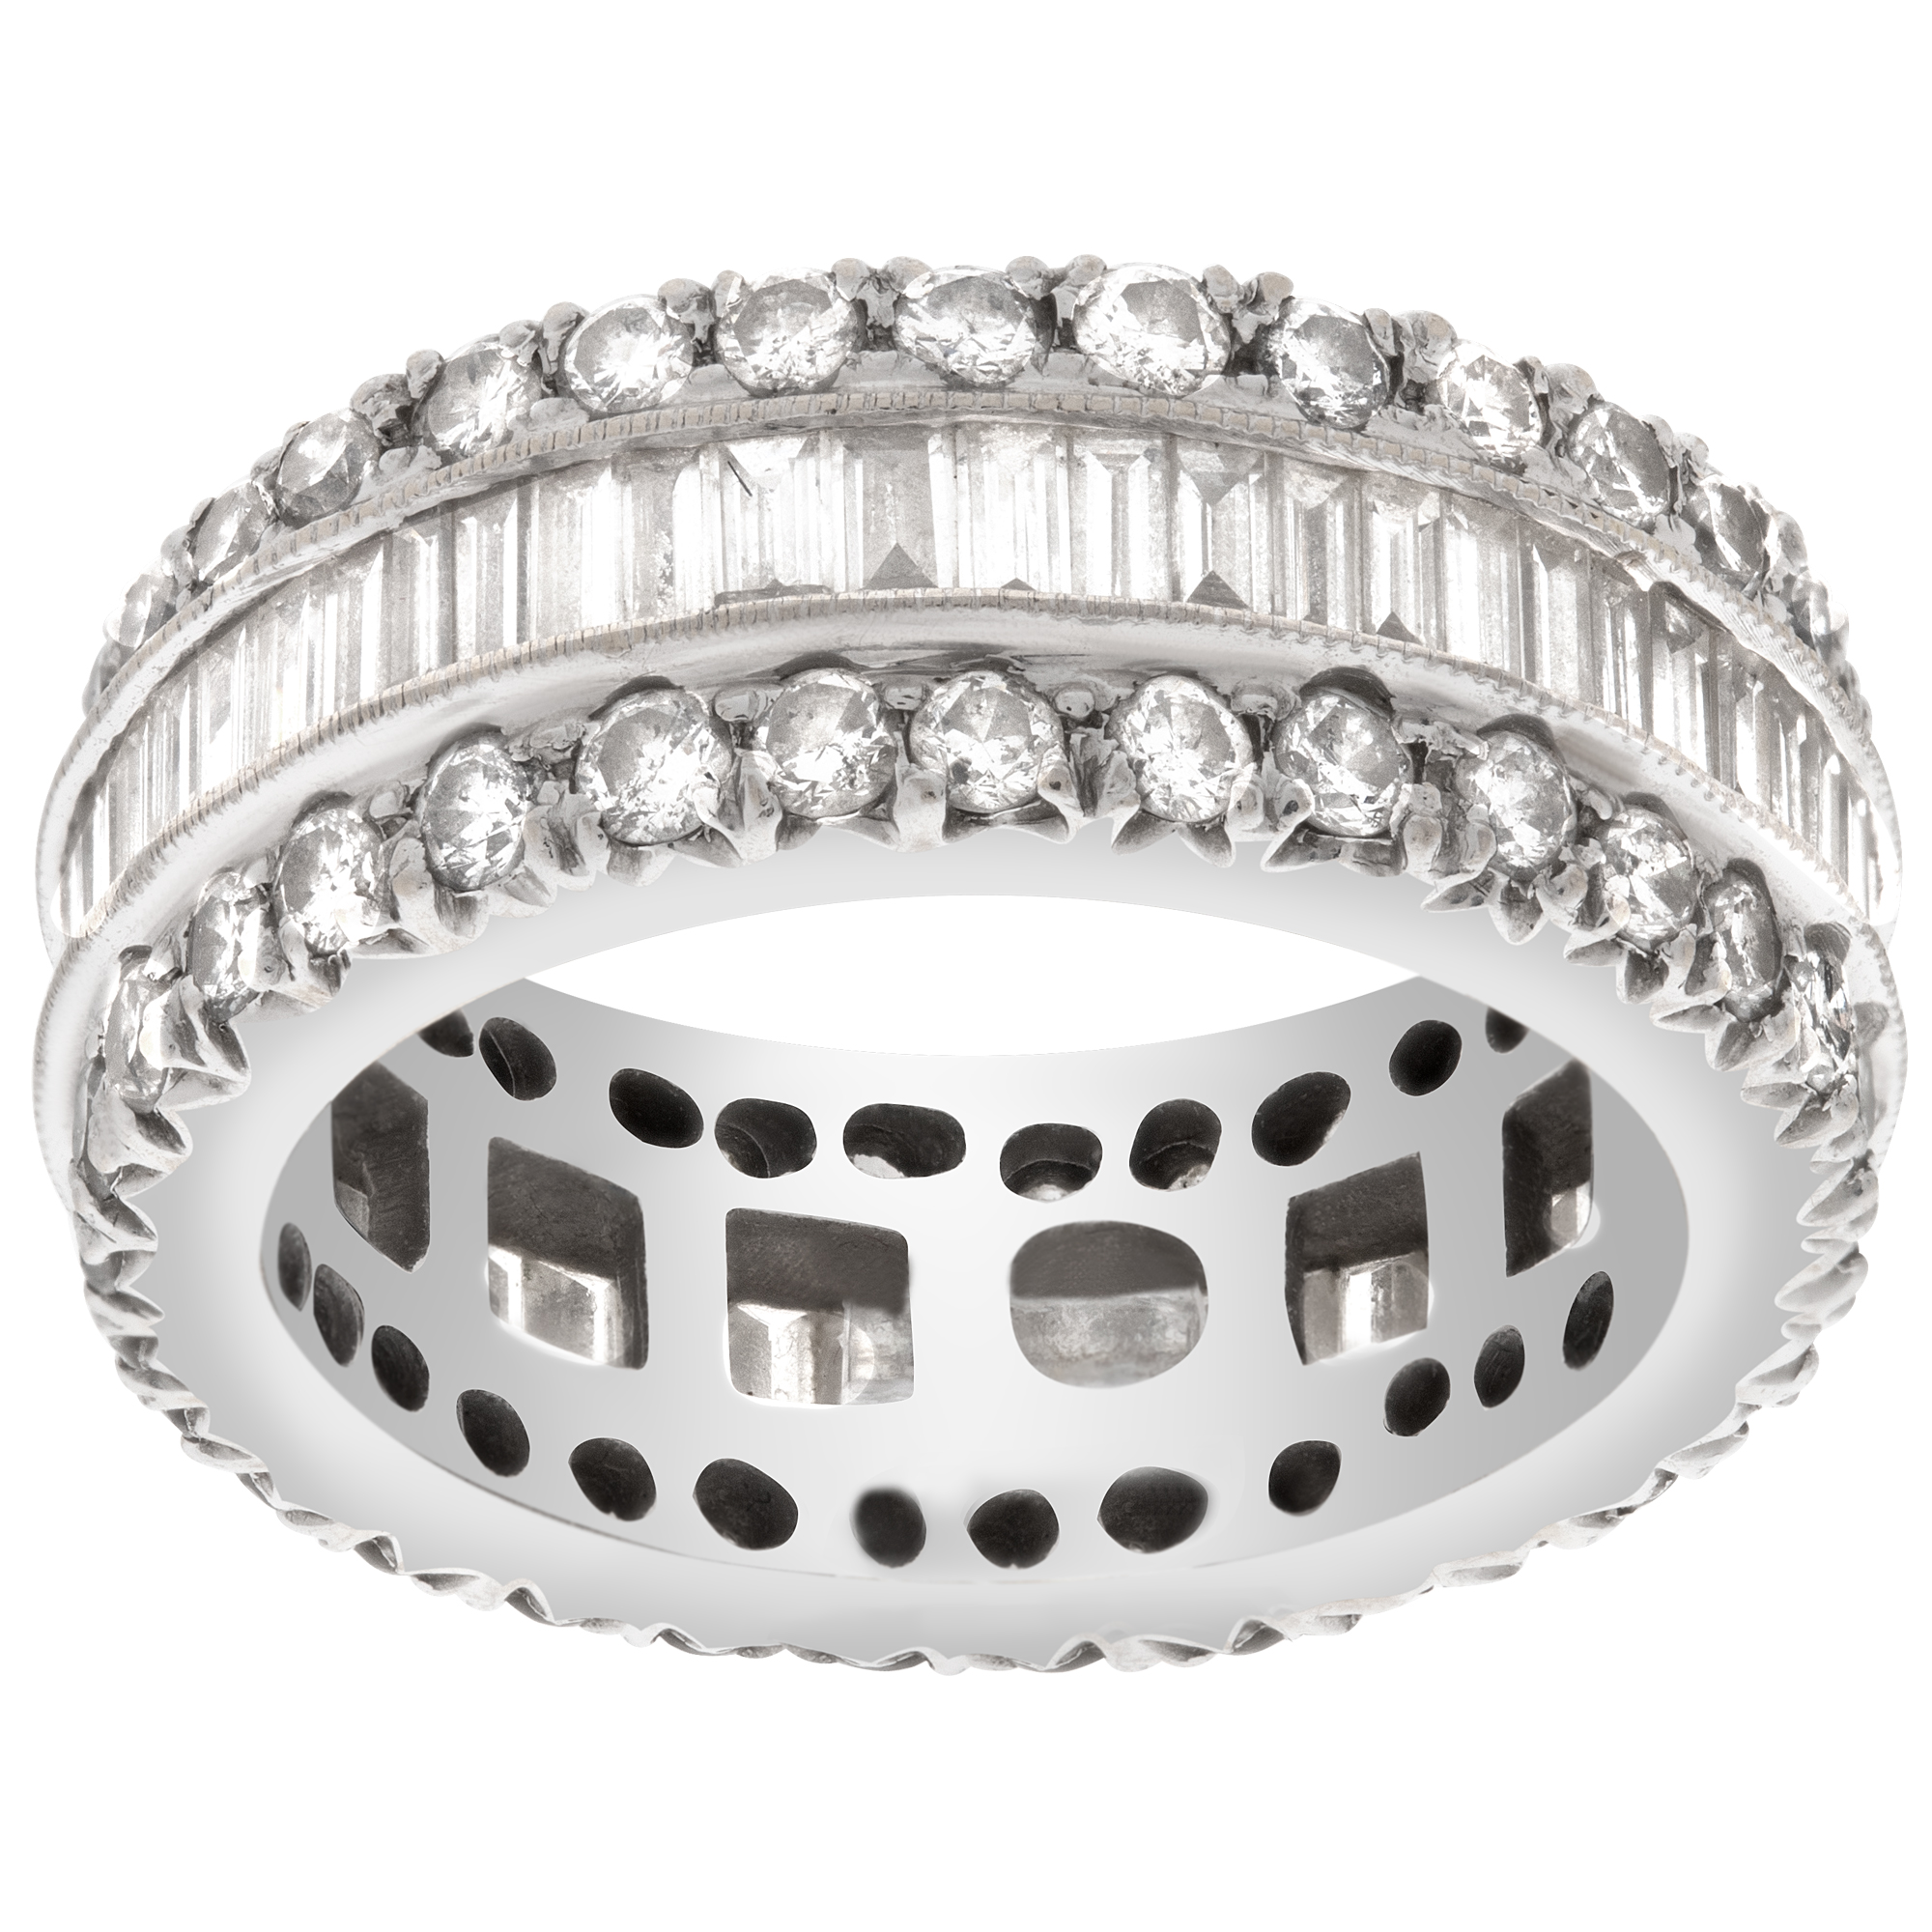 Eternity diamonds ring with over 4.50 carats emerald and round brilliant cut diamonds in 18K white gold image 1